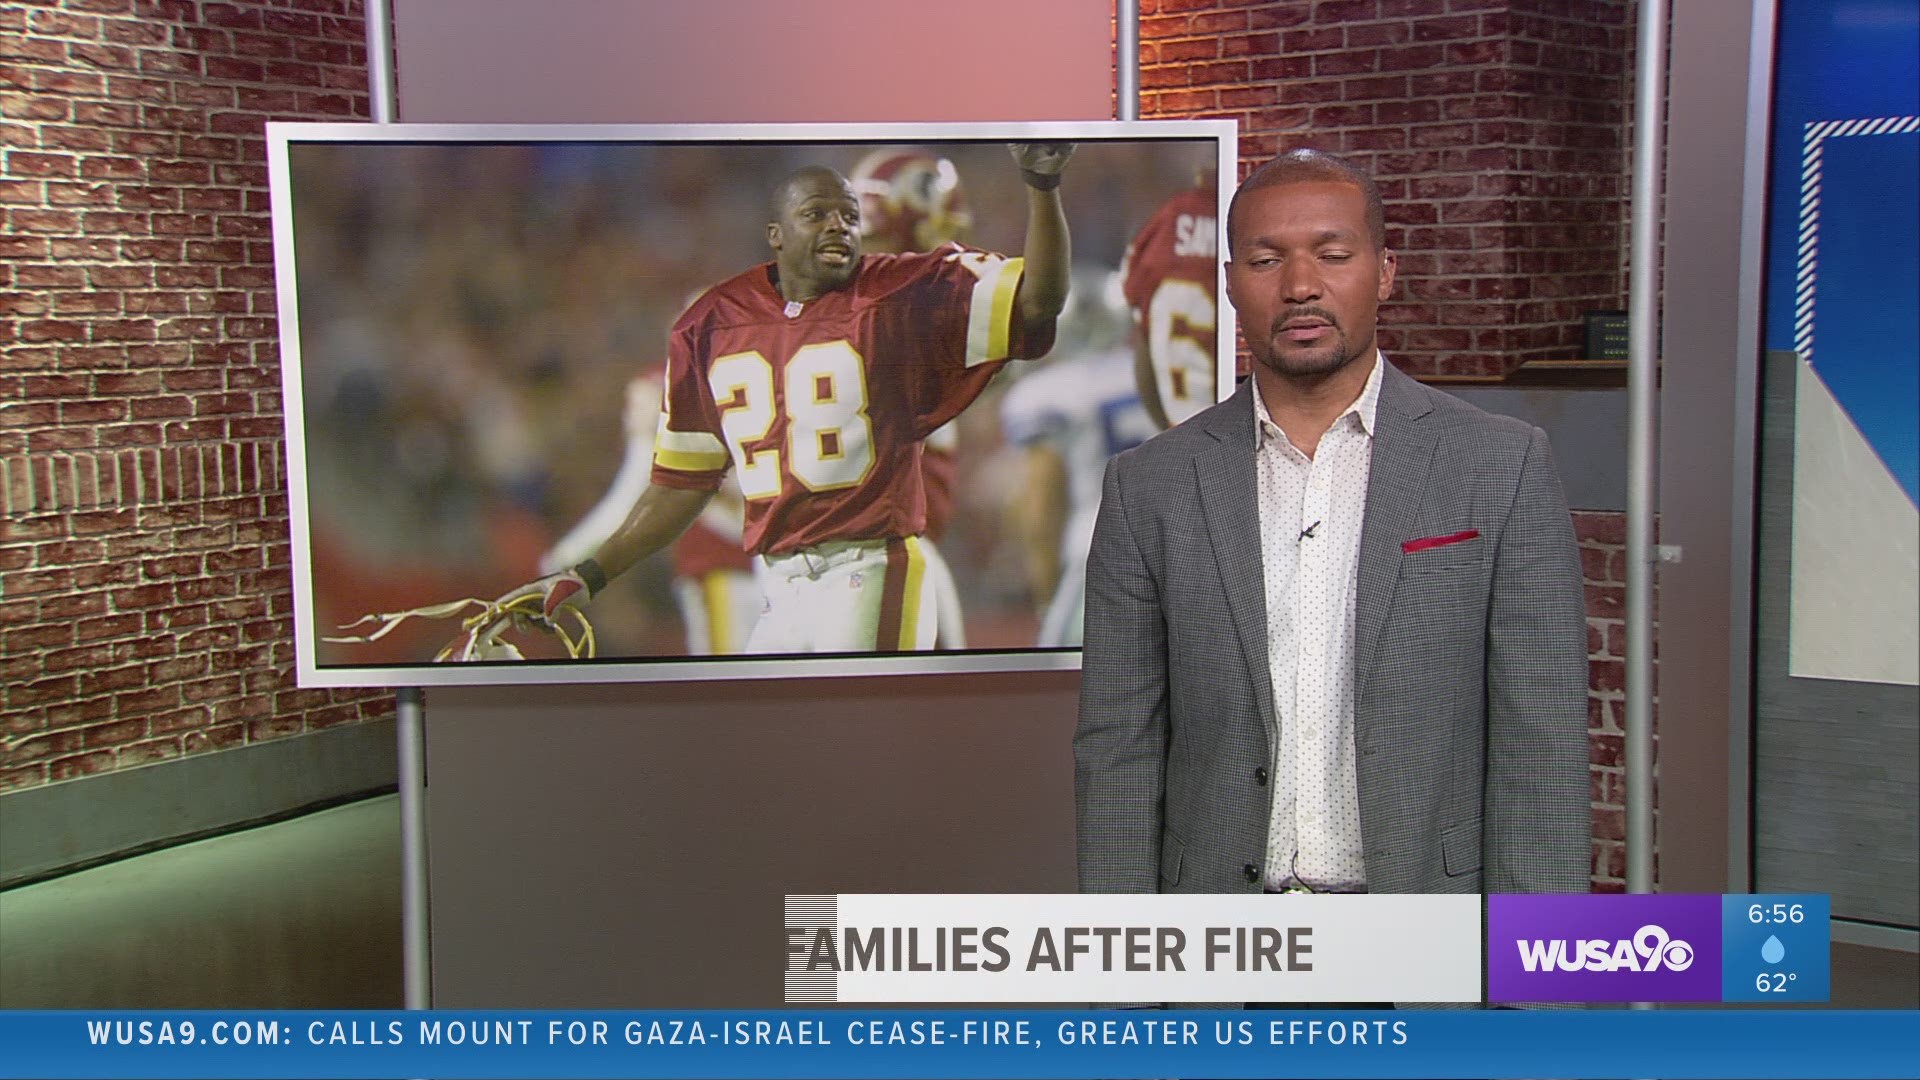 Pro Football Hall of Famer Darrell Green and WFT Jimmy Moreland will help families after apartment fire